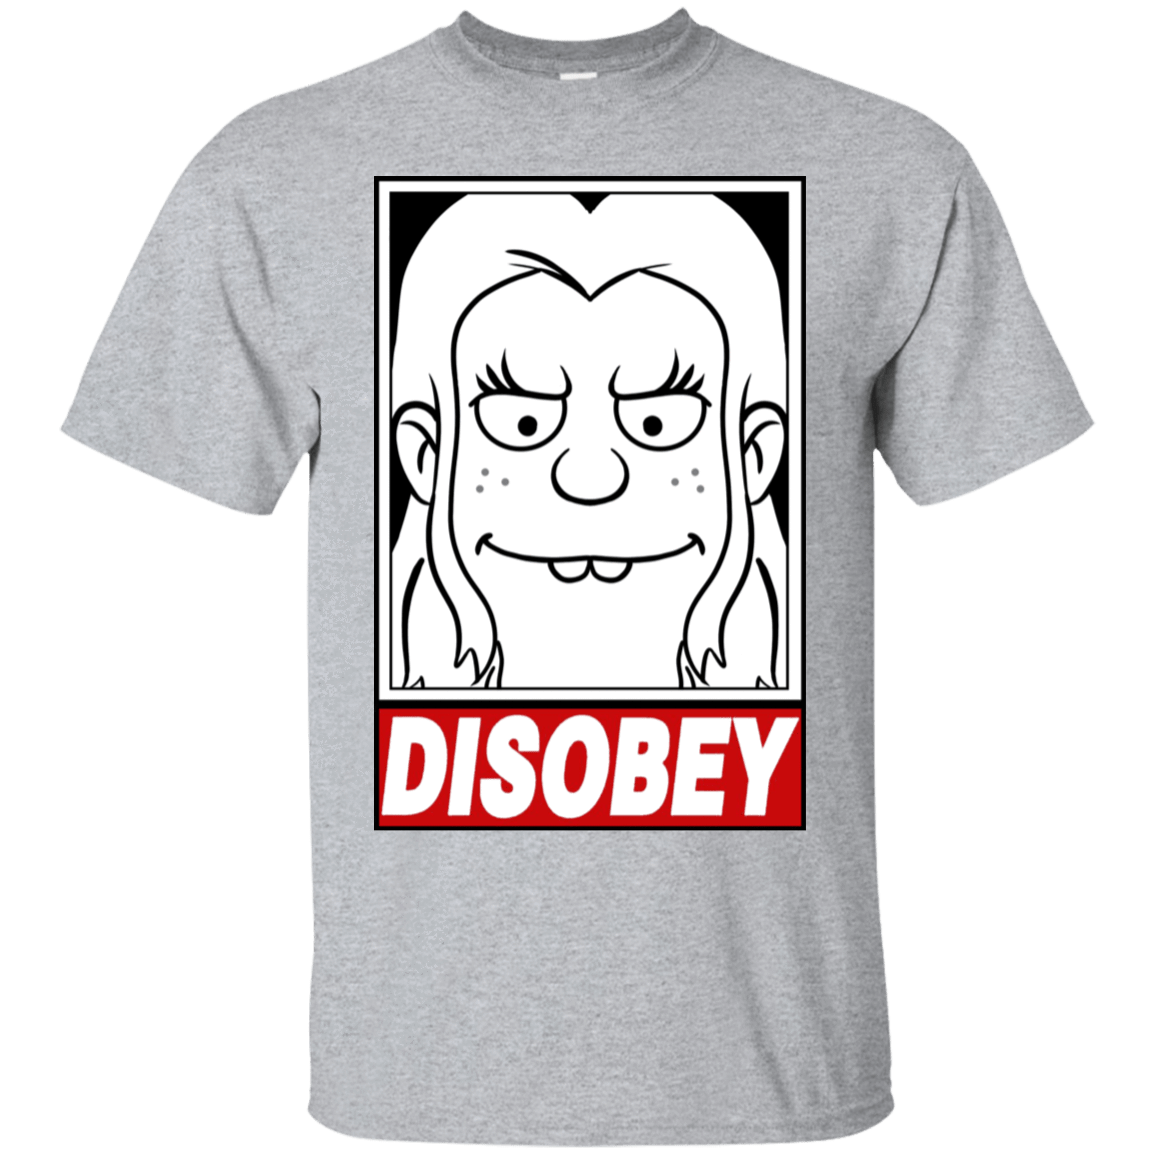 T-Shirts Sport Grey / S Disobey T-Shirt